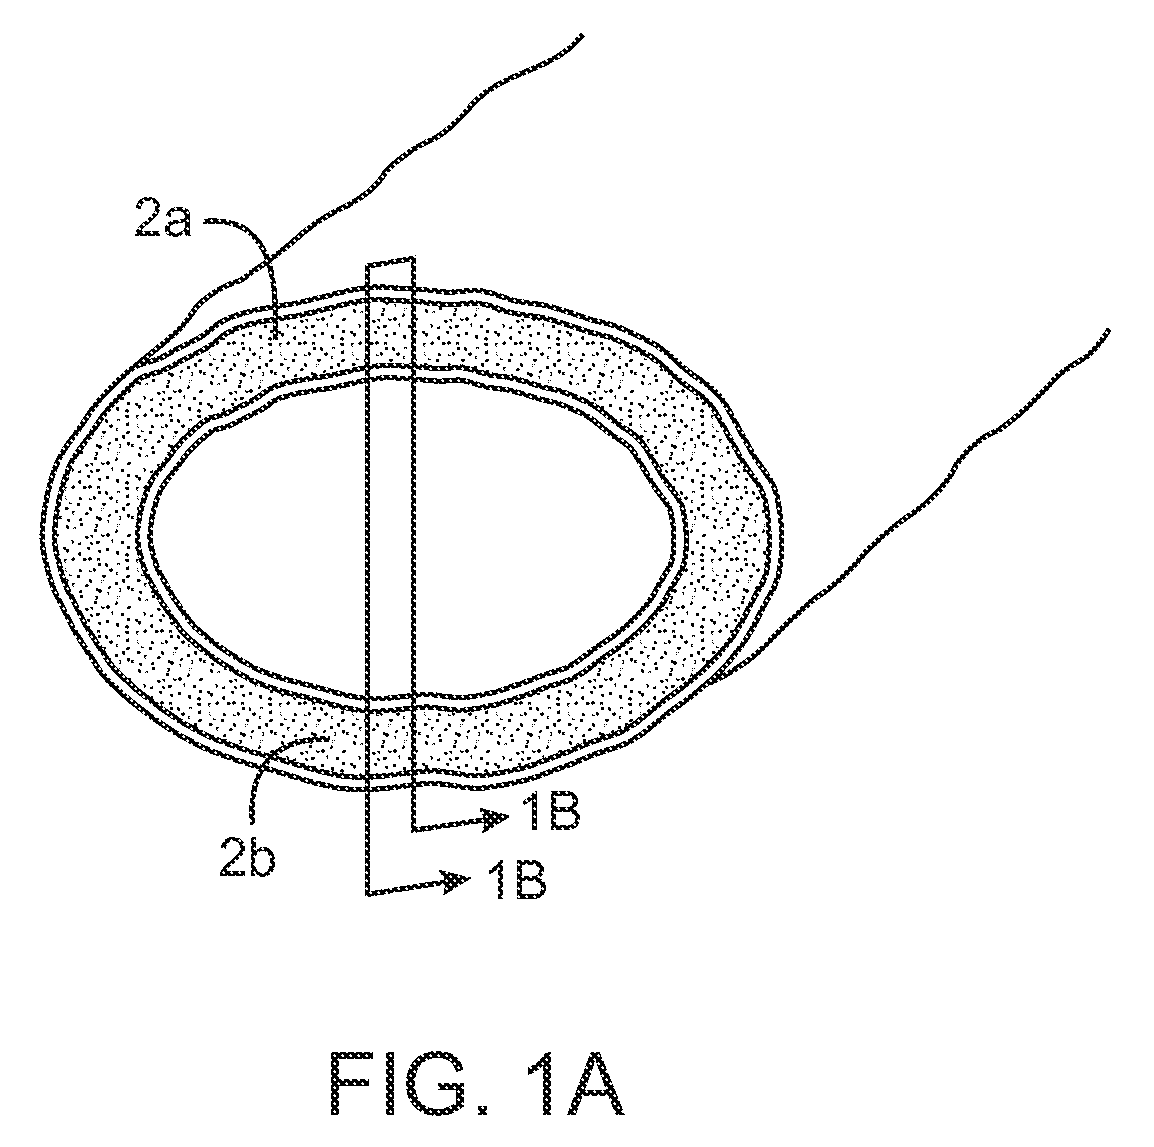 Electrosurgical instrument and method of use